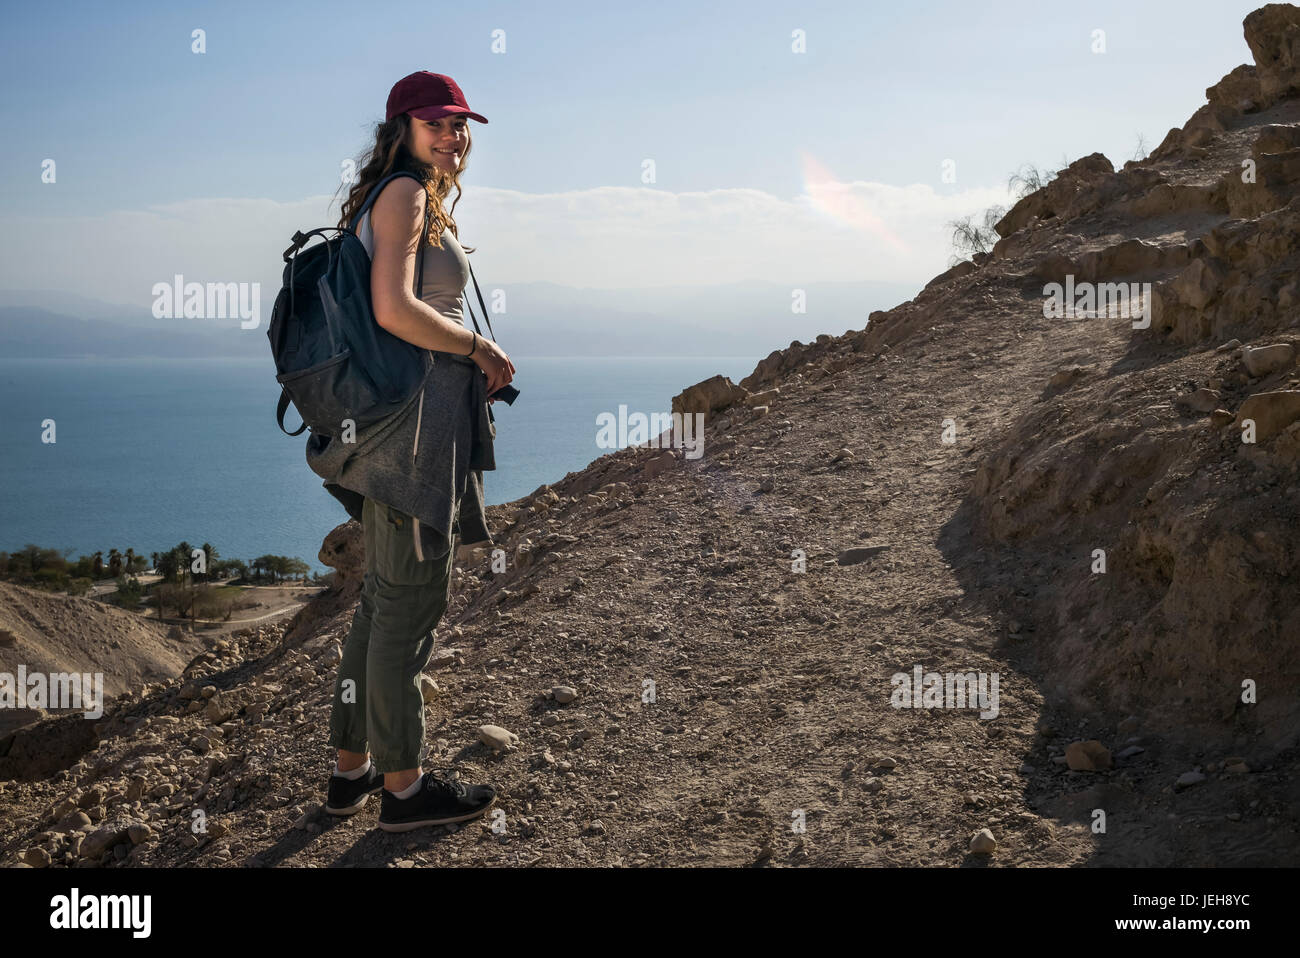 Discover 133+ cool hiking poses best